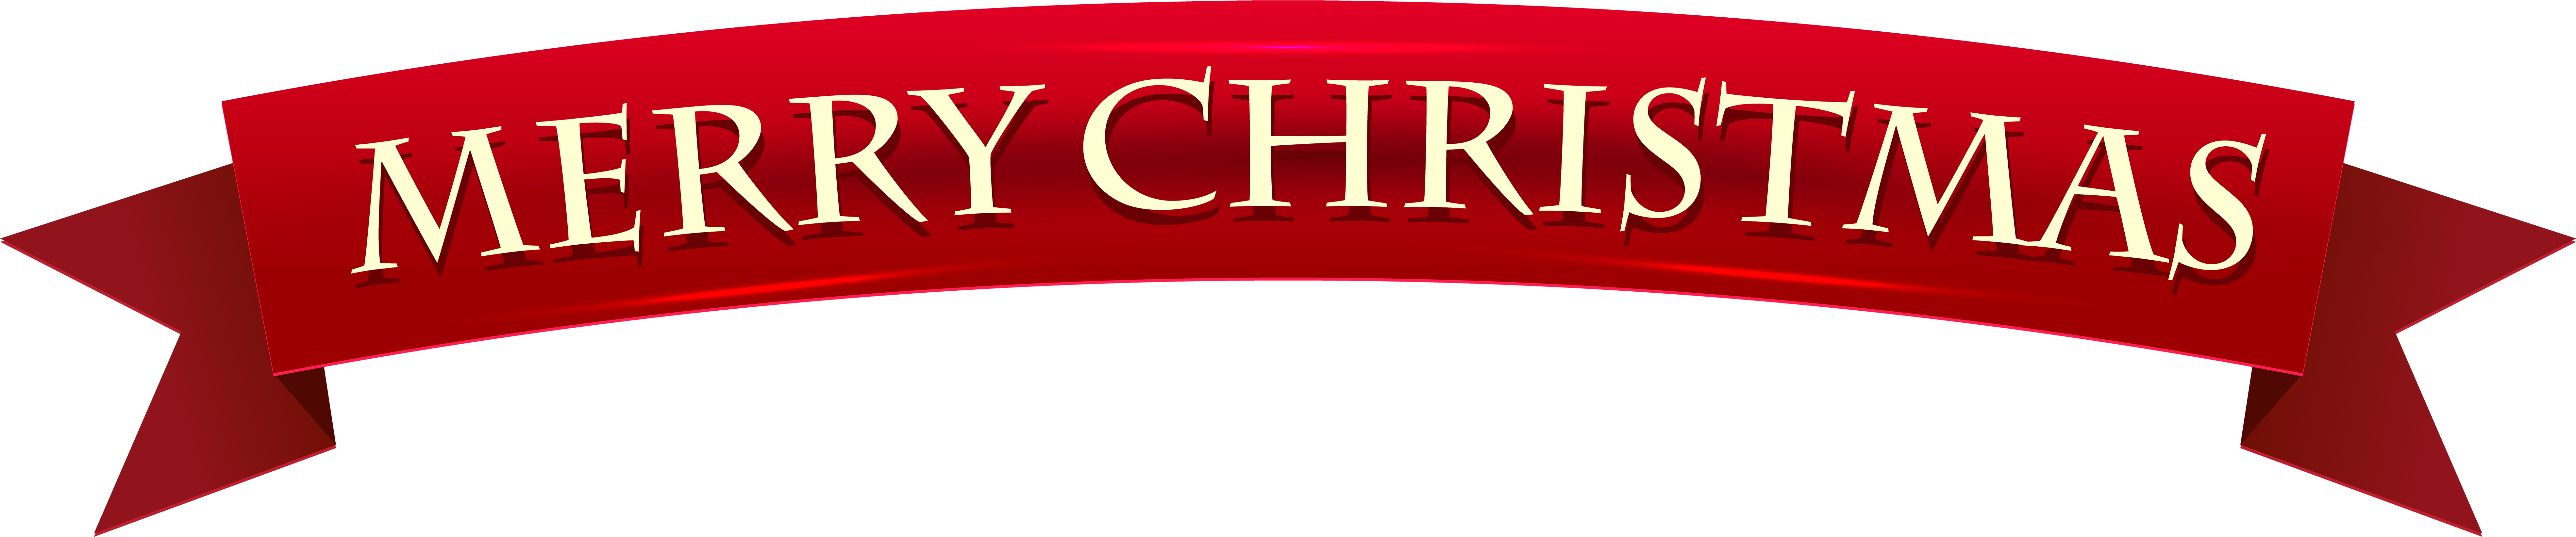 Merry Christmas Banner Png - Merry Christmas Long Banner Clipart ...